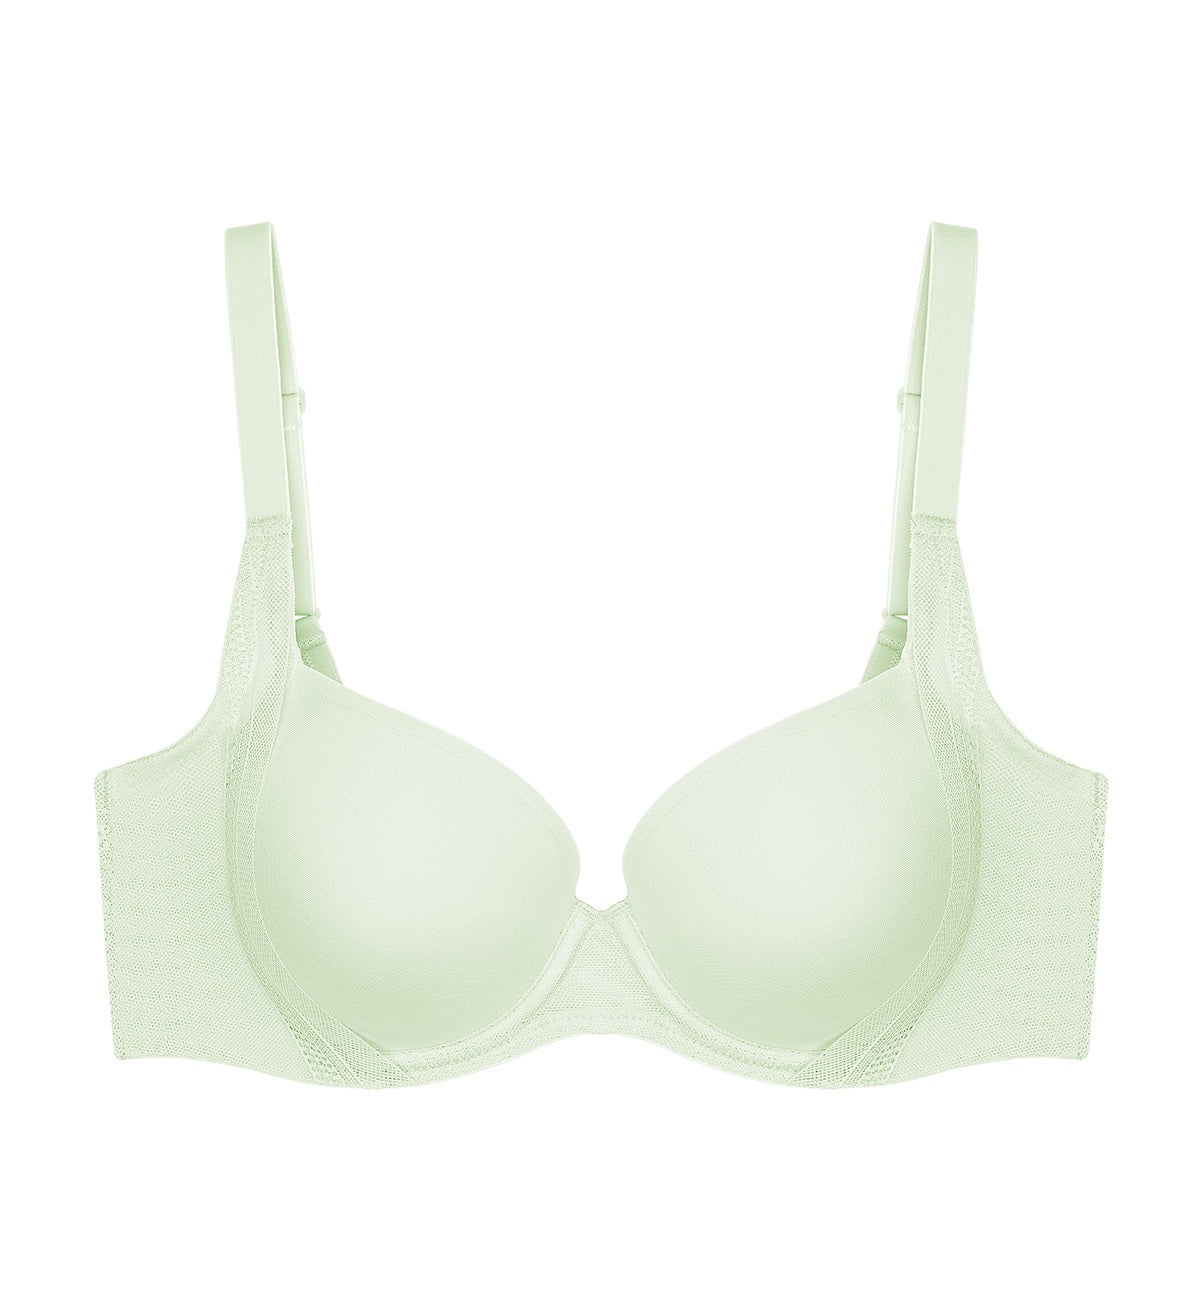 Invisi Lace Padded Wired Full Cover T-Shirt Bra - Moss Green